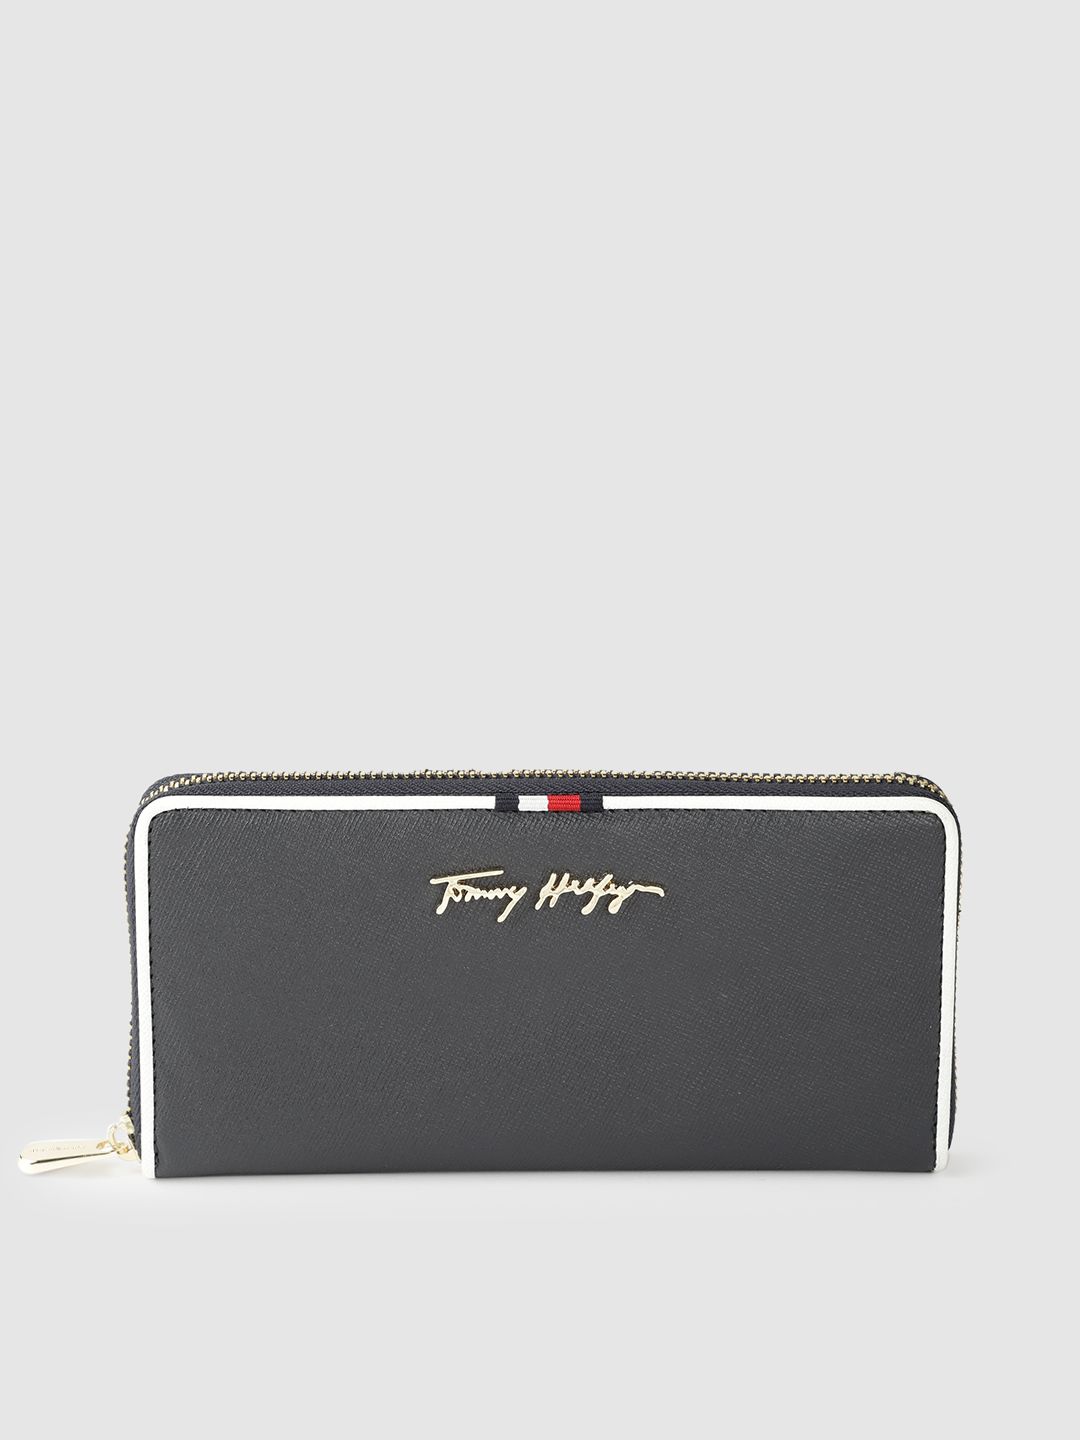 Tommy Hilfiger Women Navy Blue Textured Embellished Leather Zip Around Wallet Price in India